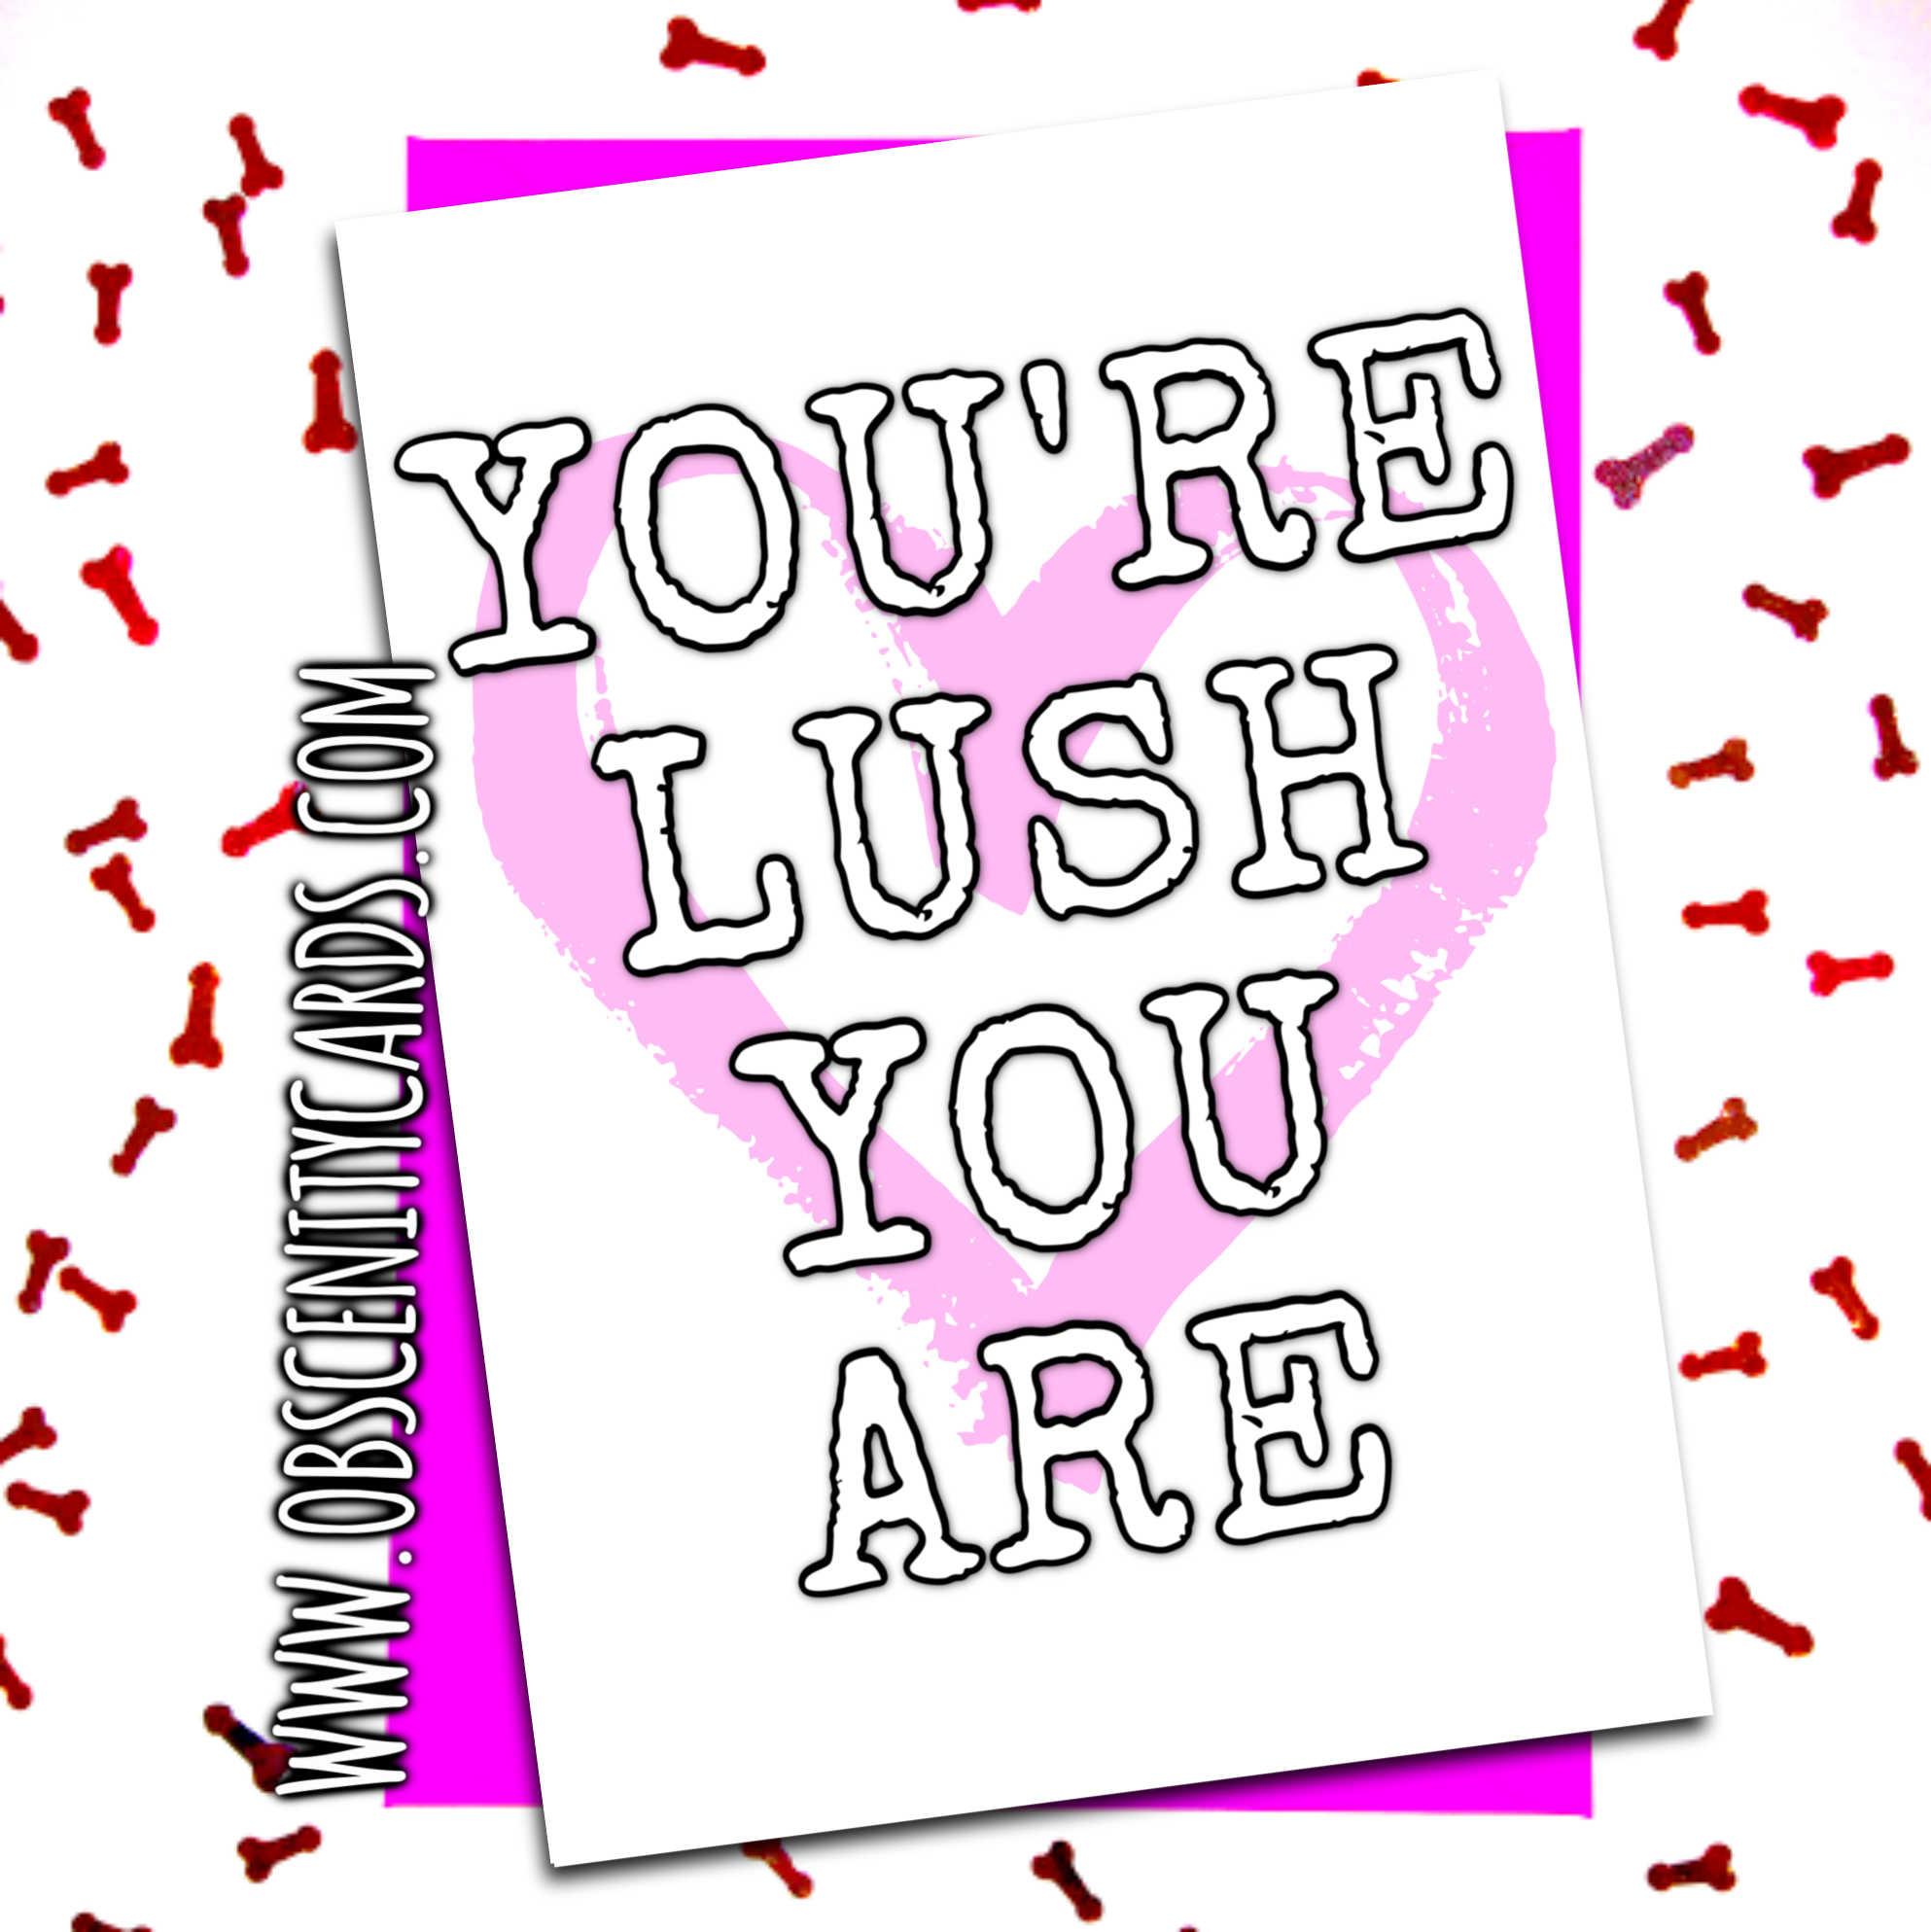 YOU'RE LUSH YOU ARE. VALENTINE'S, ANNIVERSARY, MOST OCCASION CARD